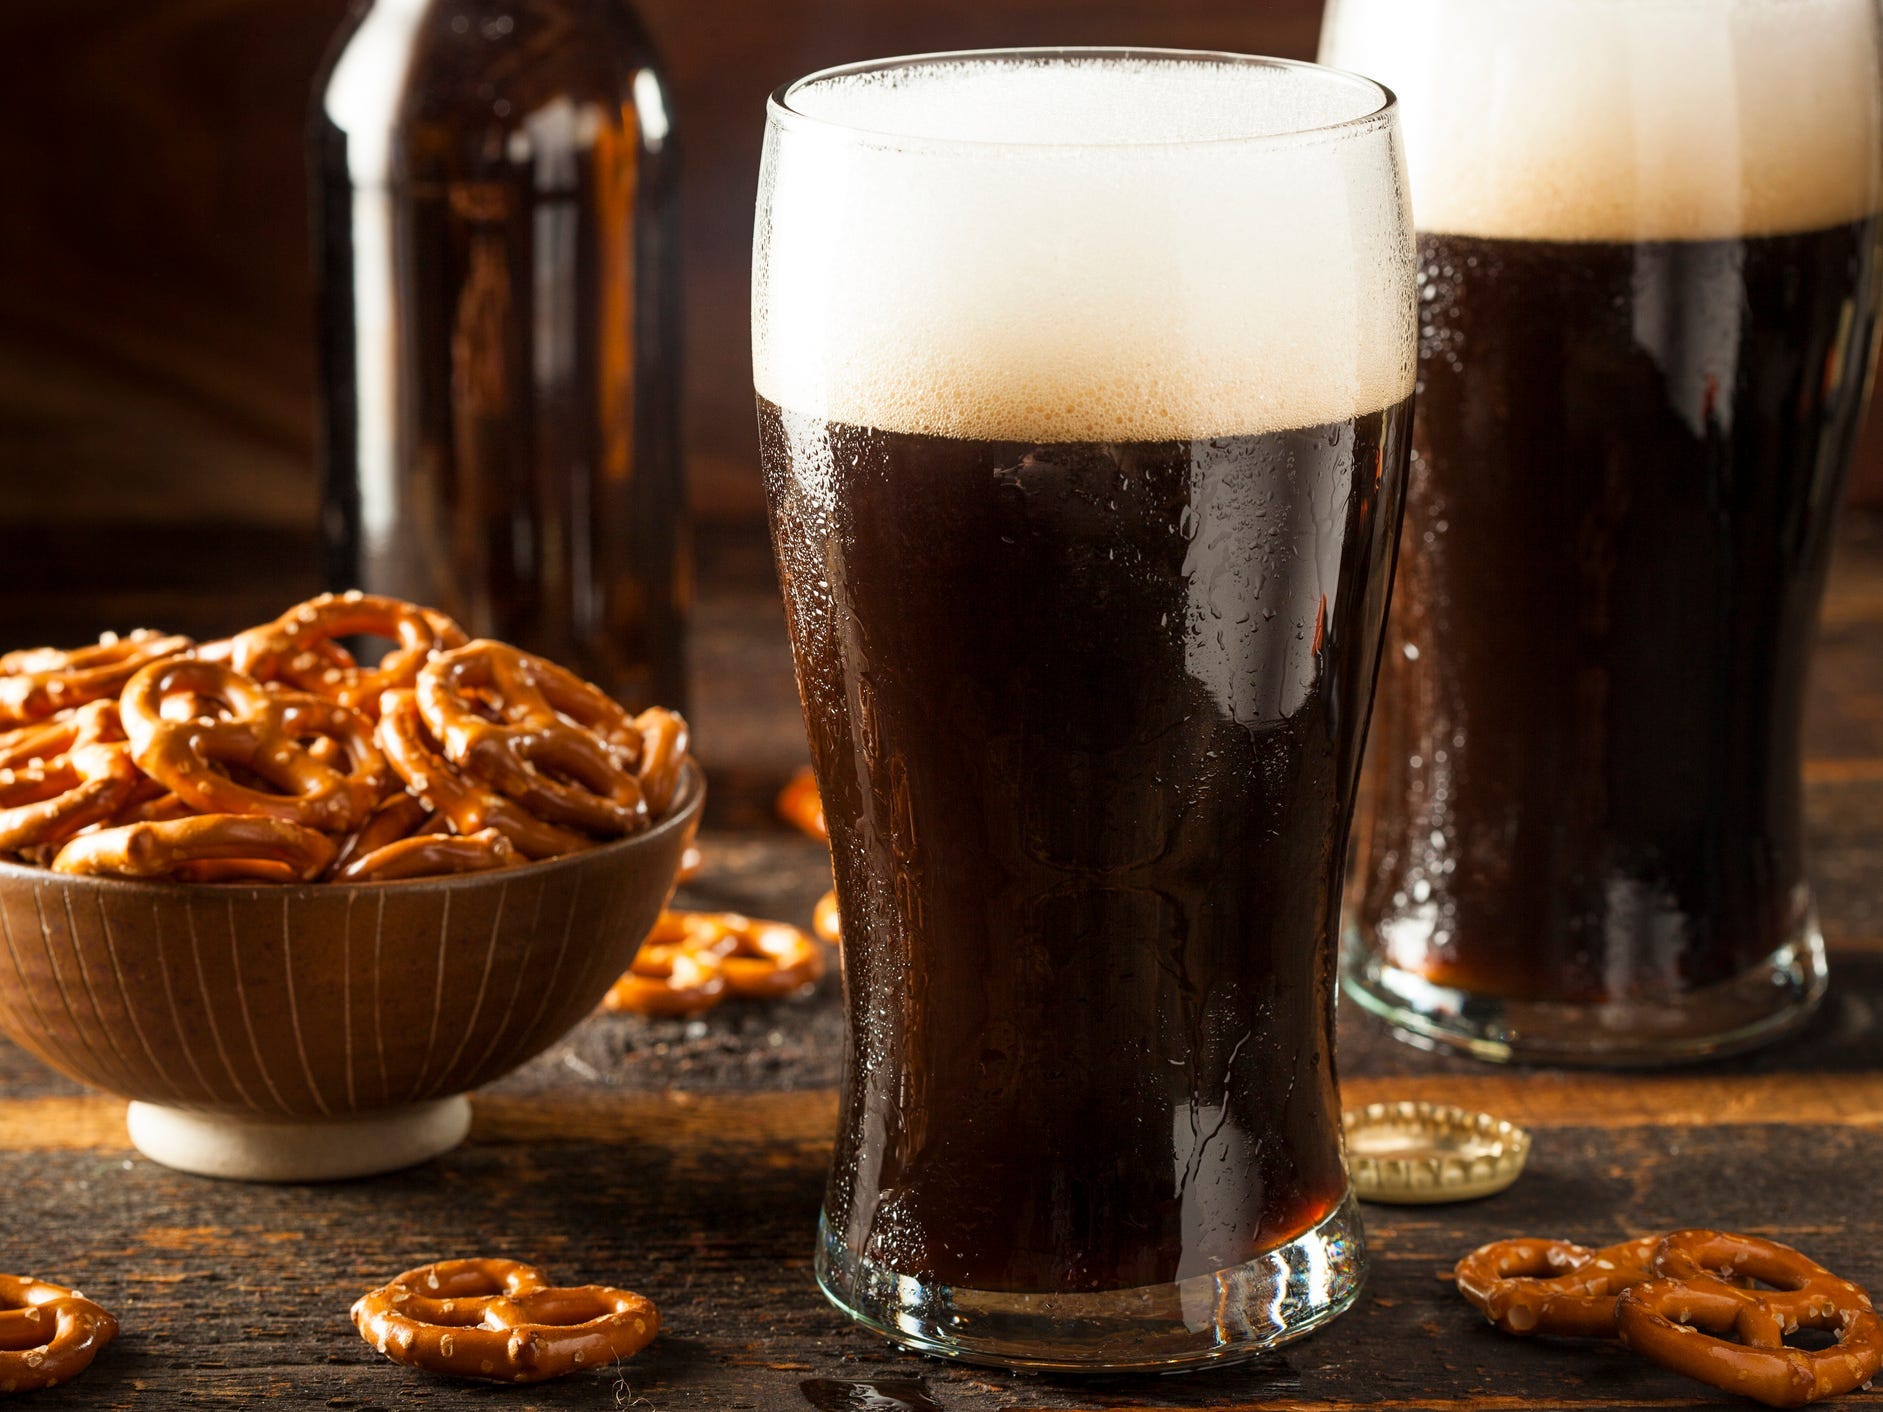 Two pints of stout beer next to a bowl of pretzels